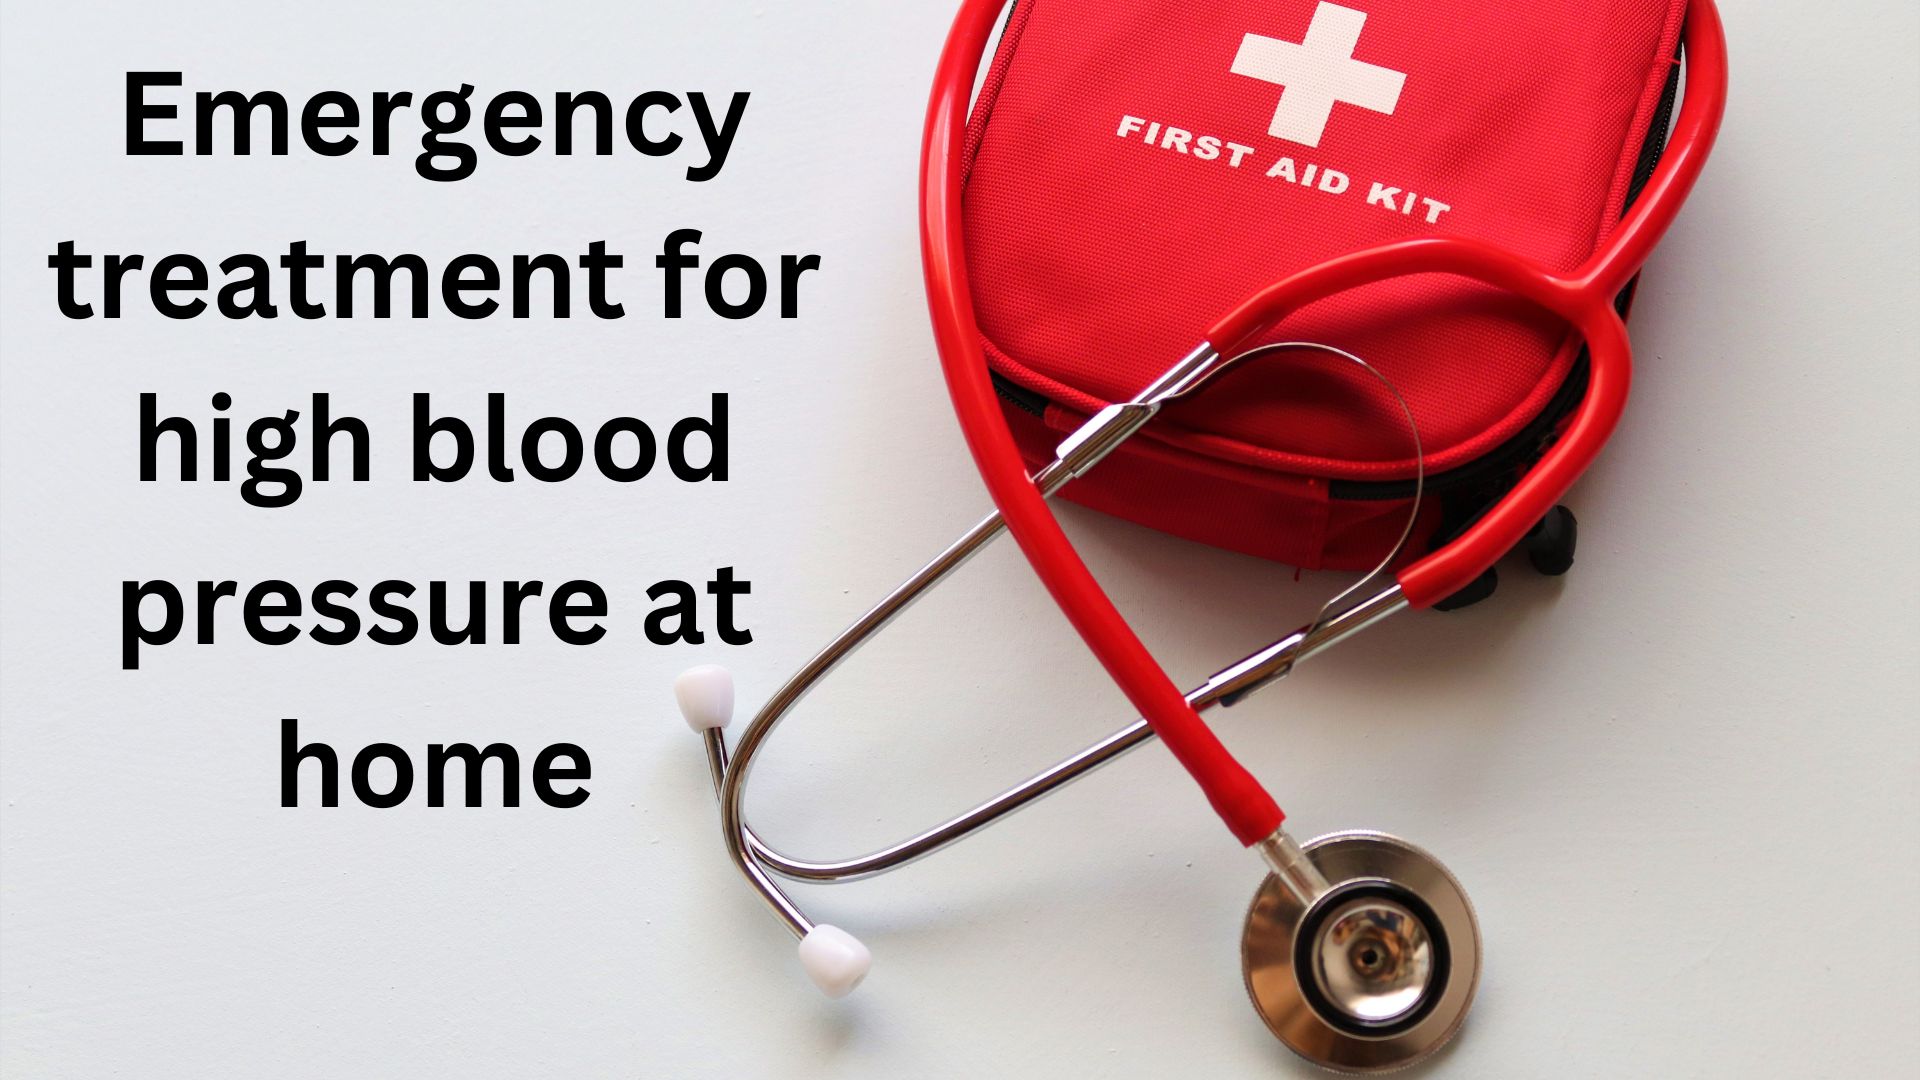 Emergency treatment for high blood pressure at home